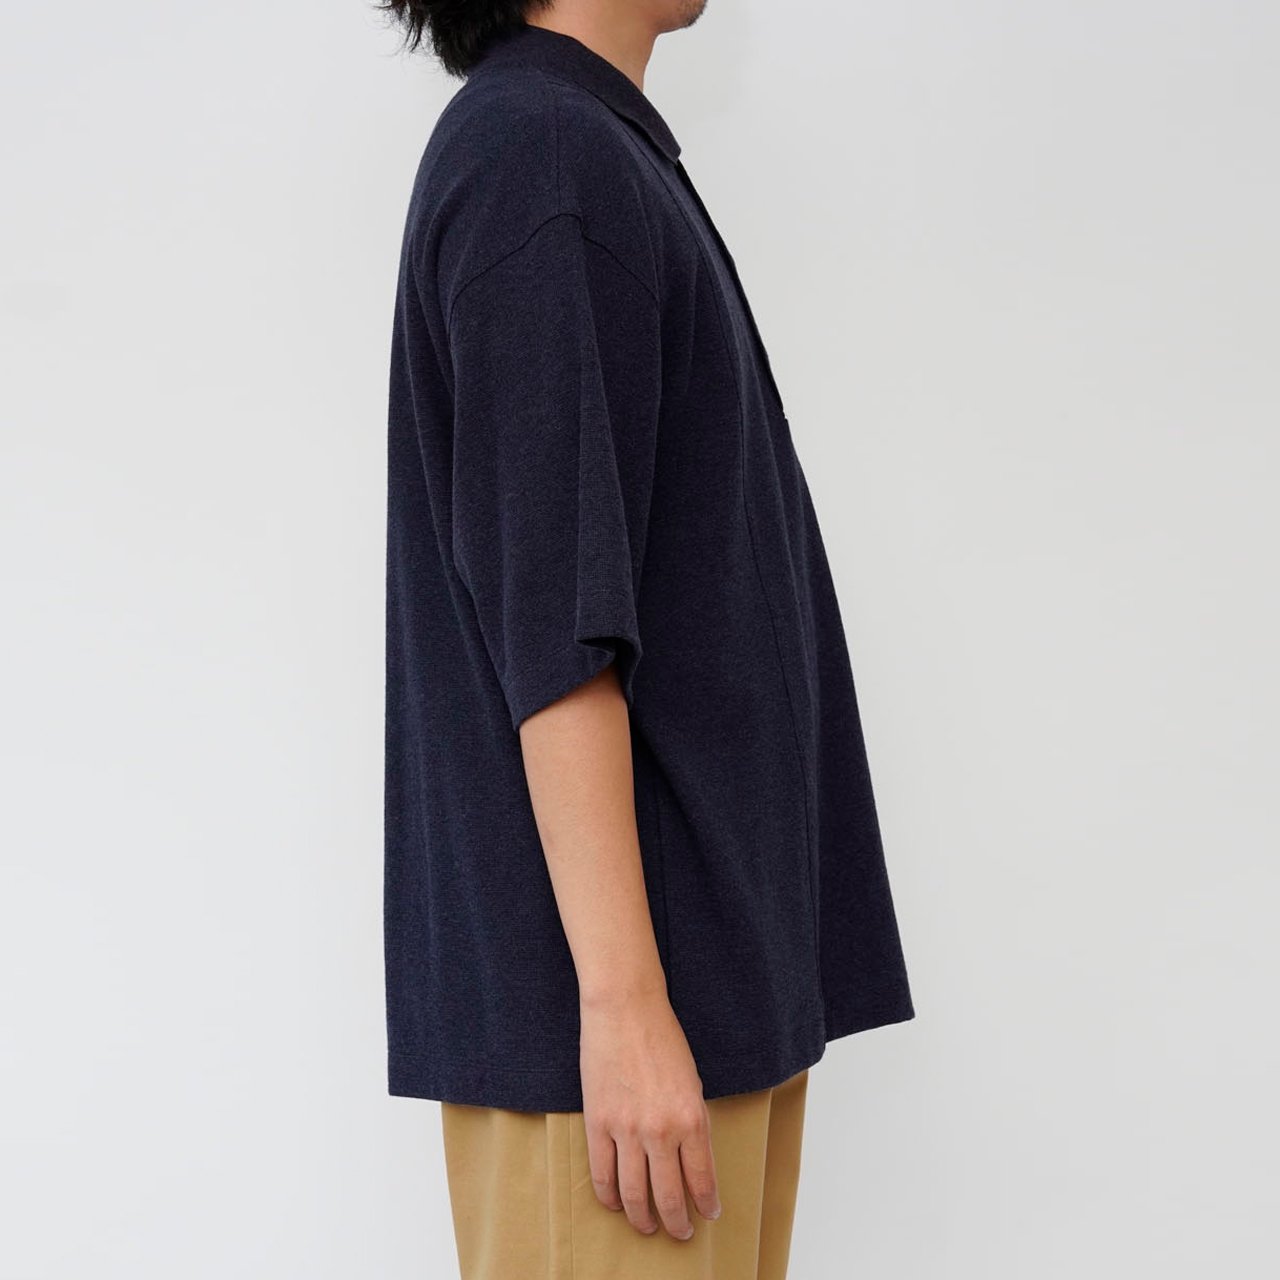 <img class='new_mark_img1' src='https://img.shop-pro.jp/img/new/icons5.gif' style='border:none;display:inline;margin:0px;padding:0px;width:auto;' />EVCON (ӥ)COTTON KNIT SHORT SLEEVE POLO SHIRTS NAVY